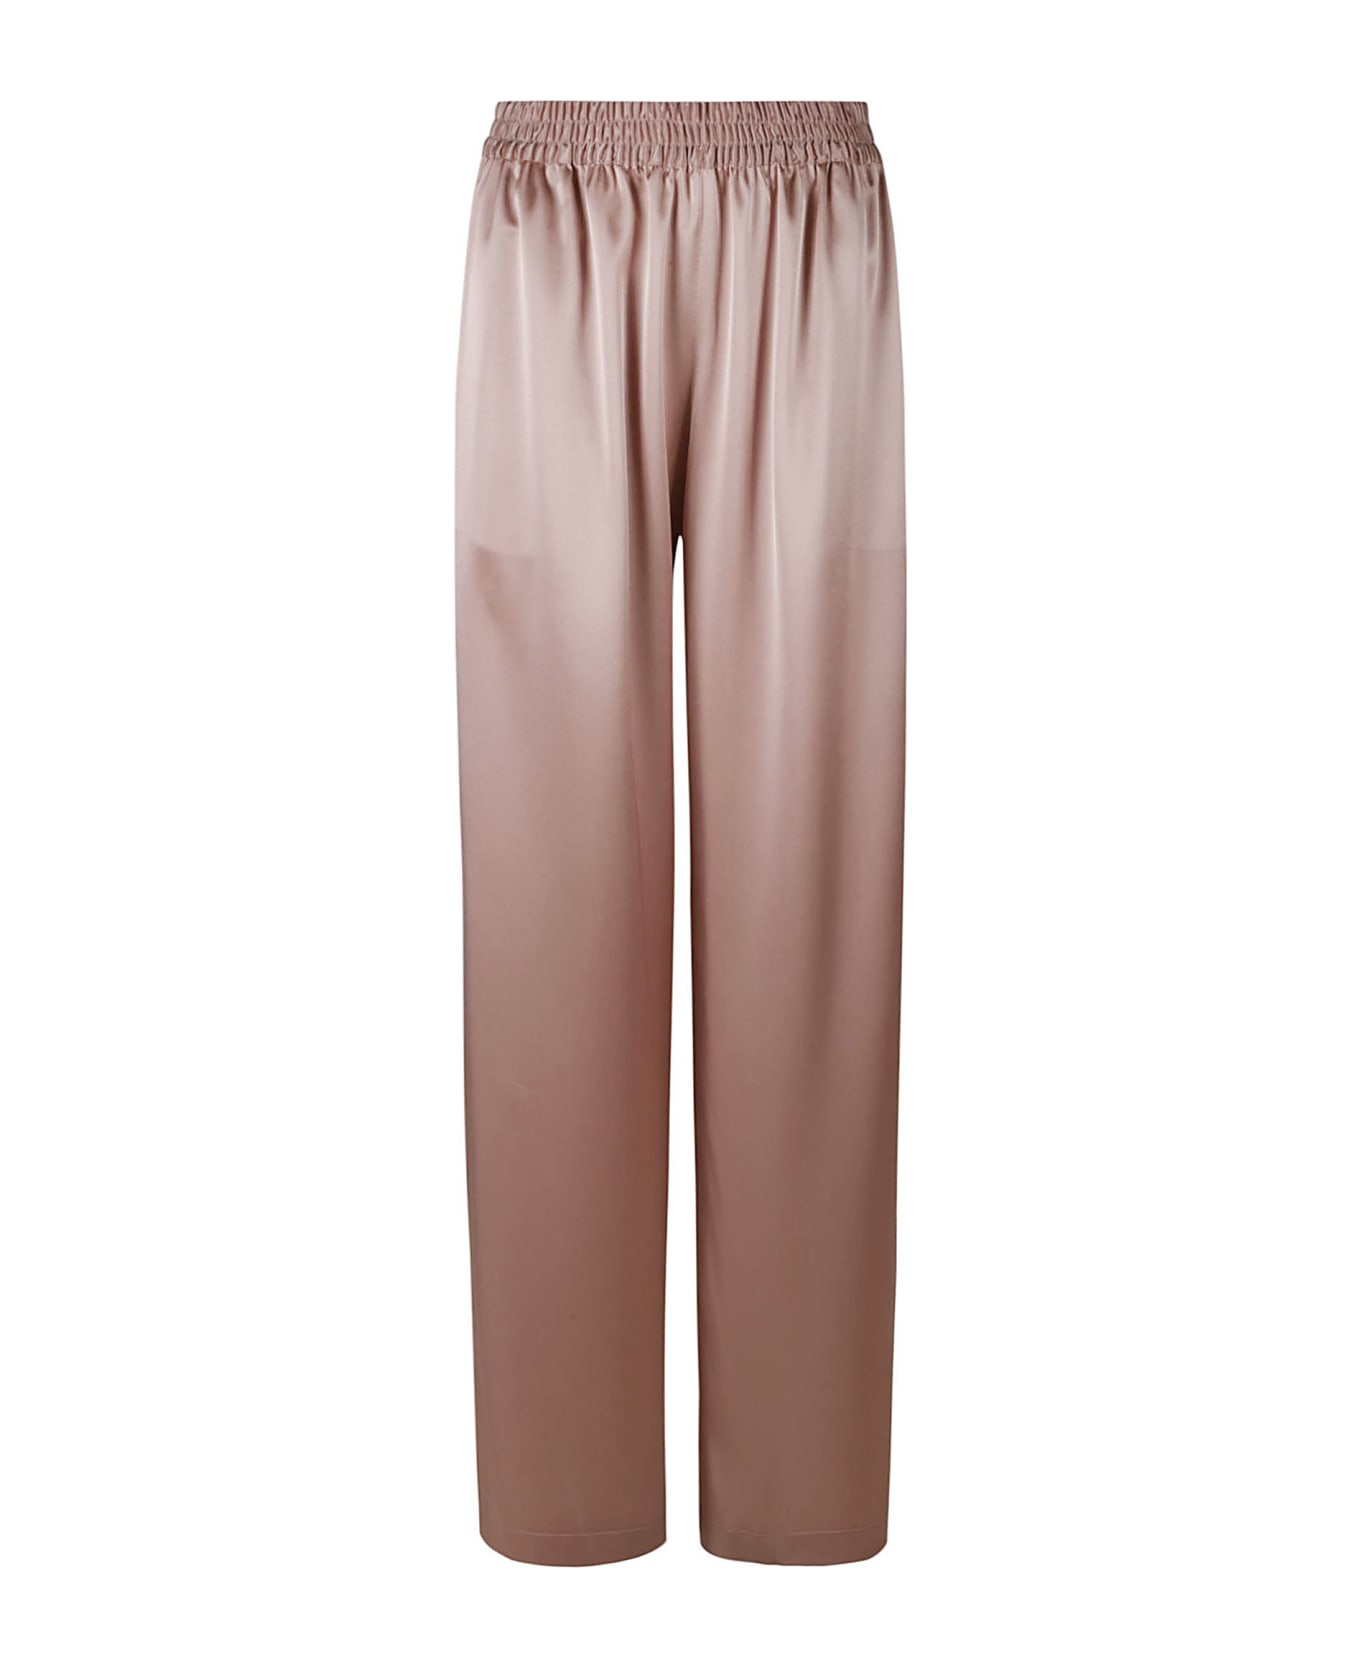 Gianluca Capannolo Antonella Trousers - Pink ボトムス